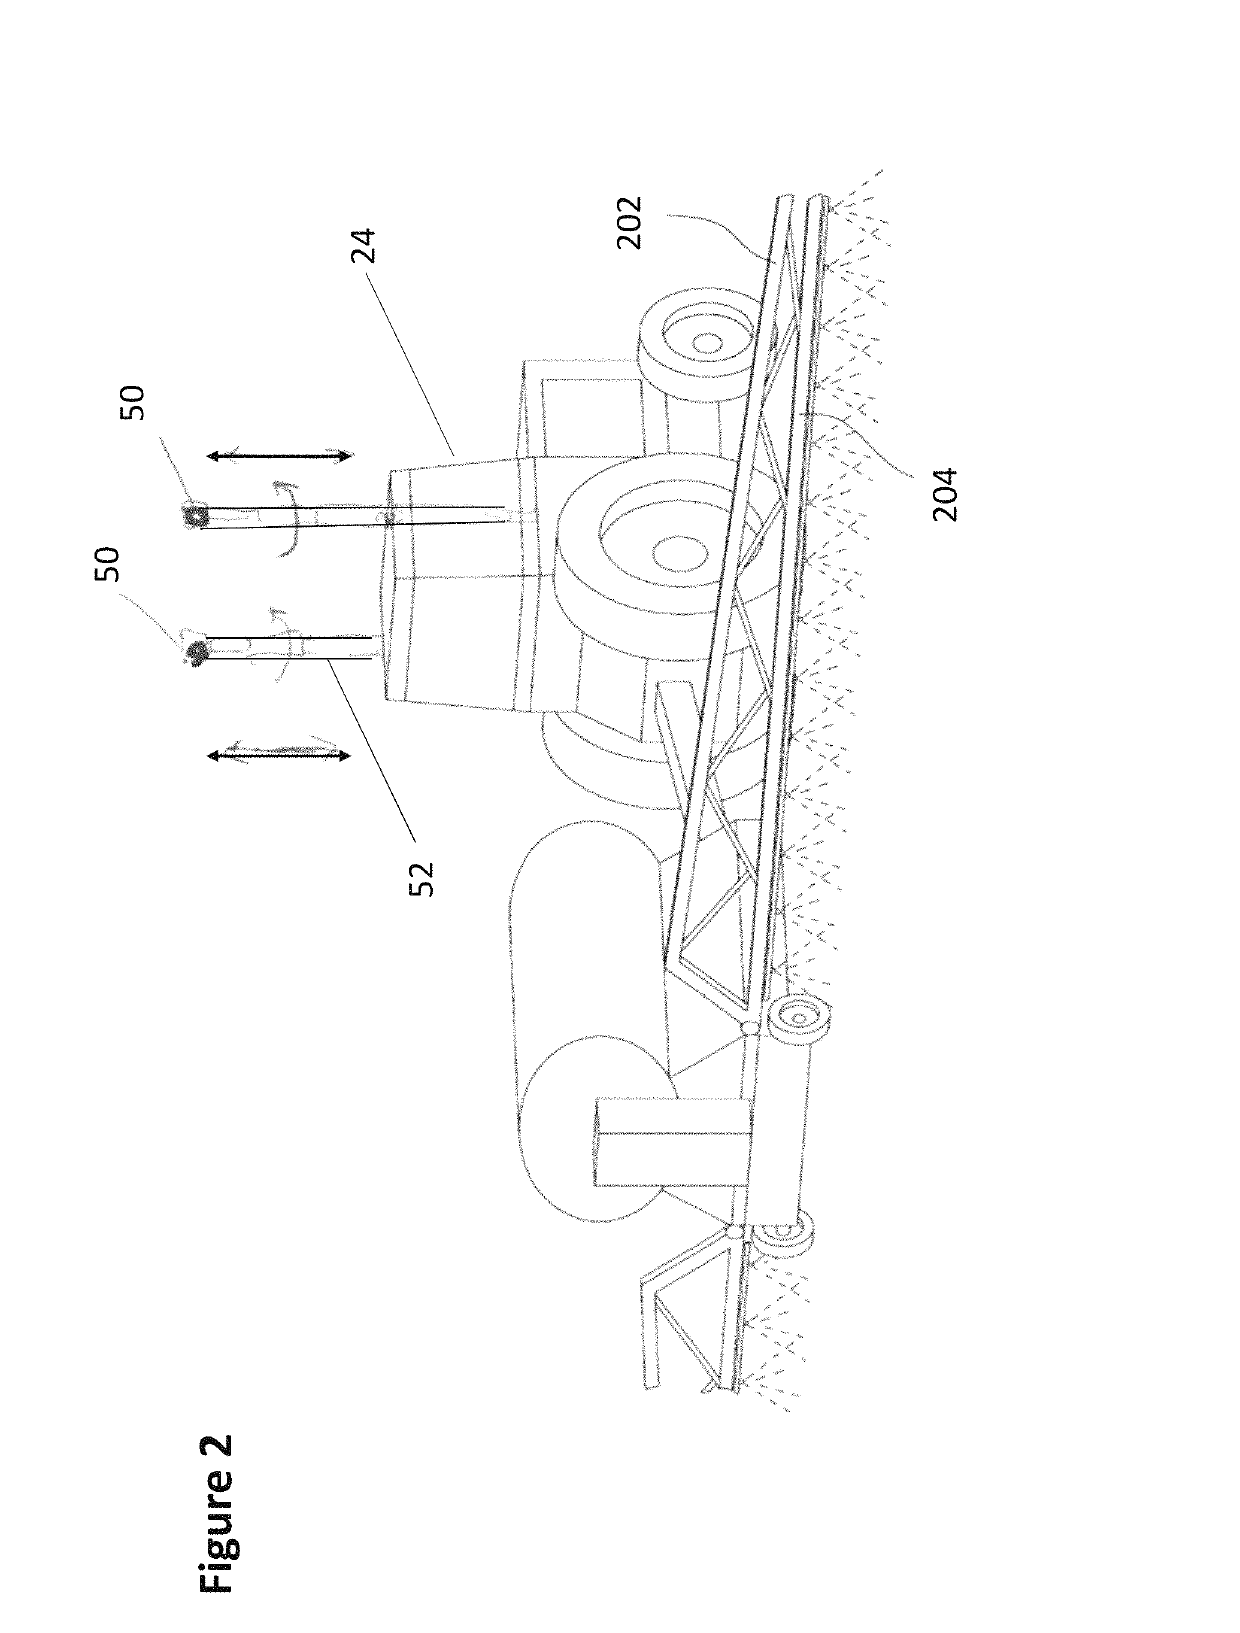 Image sensor and module for agricultural crop improvement